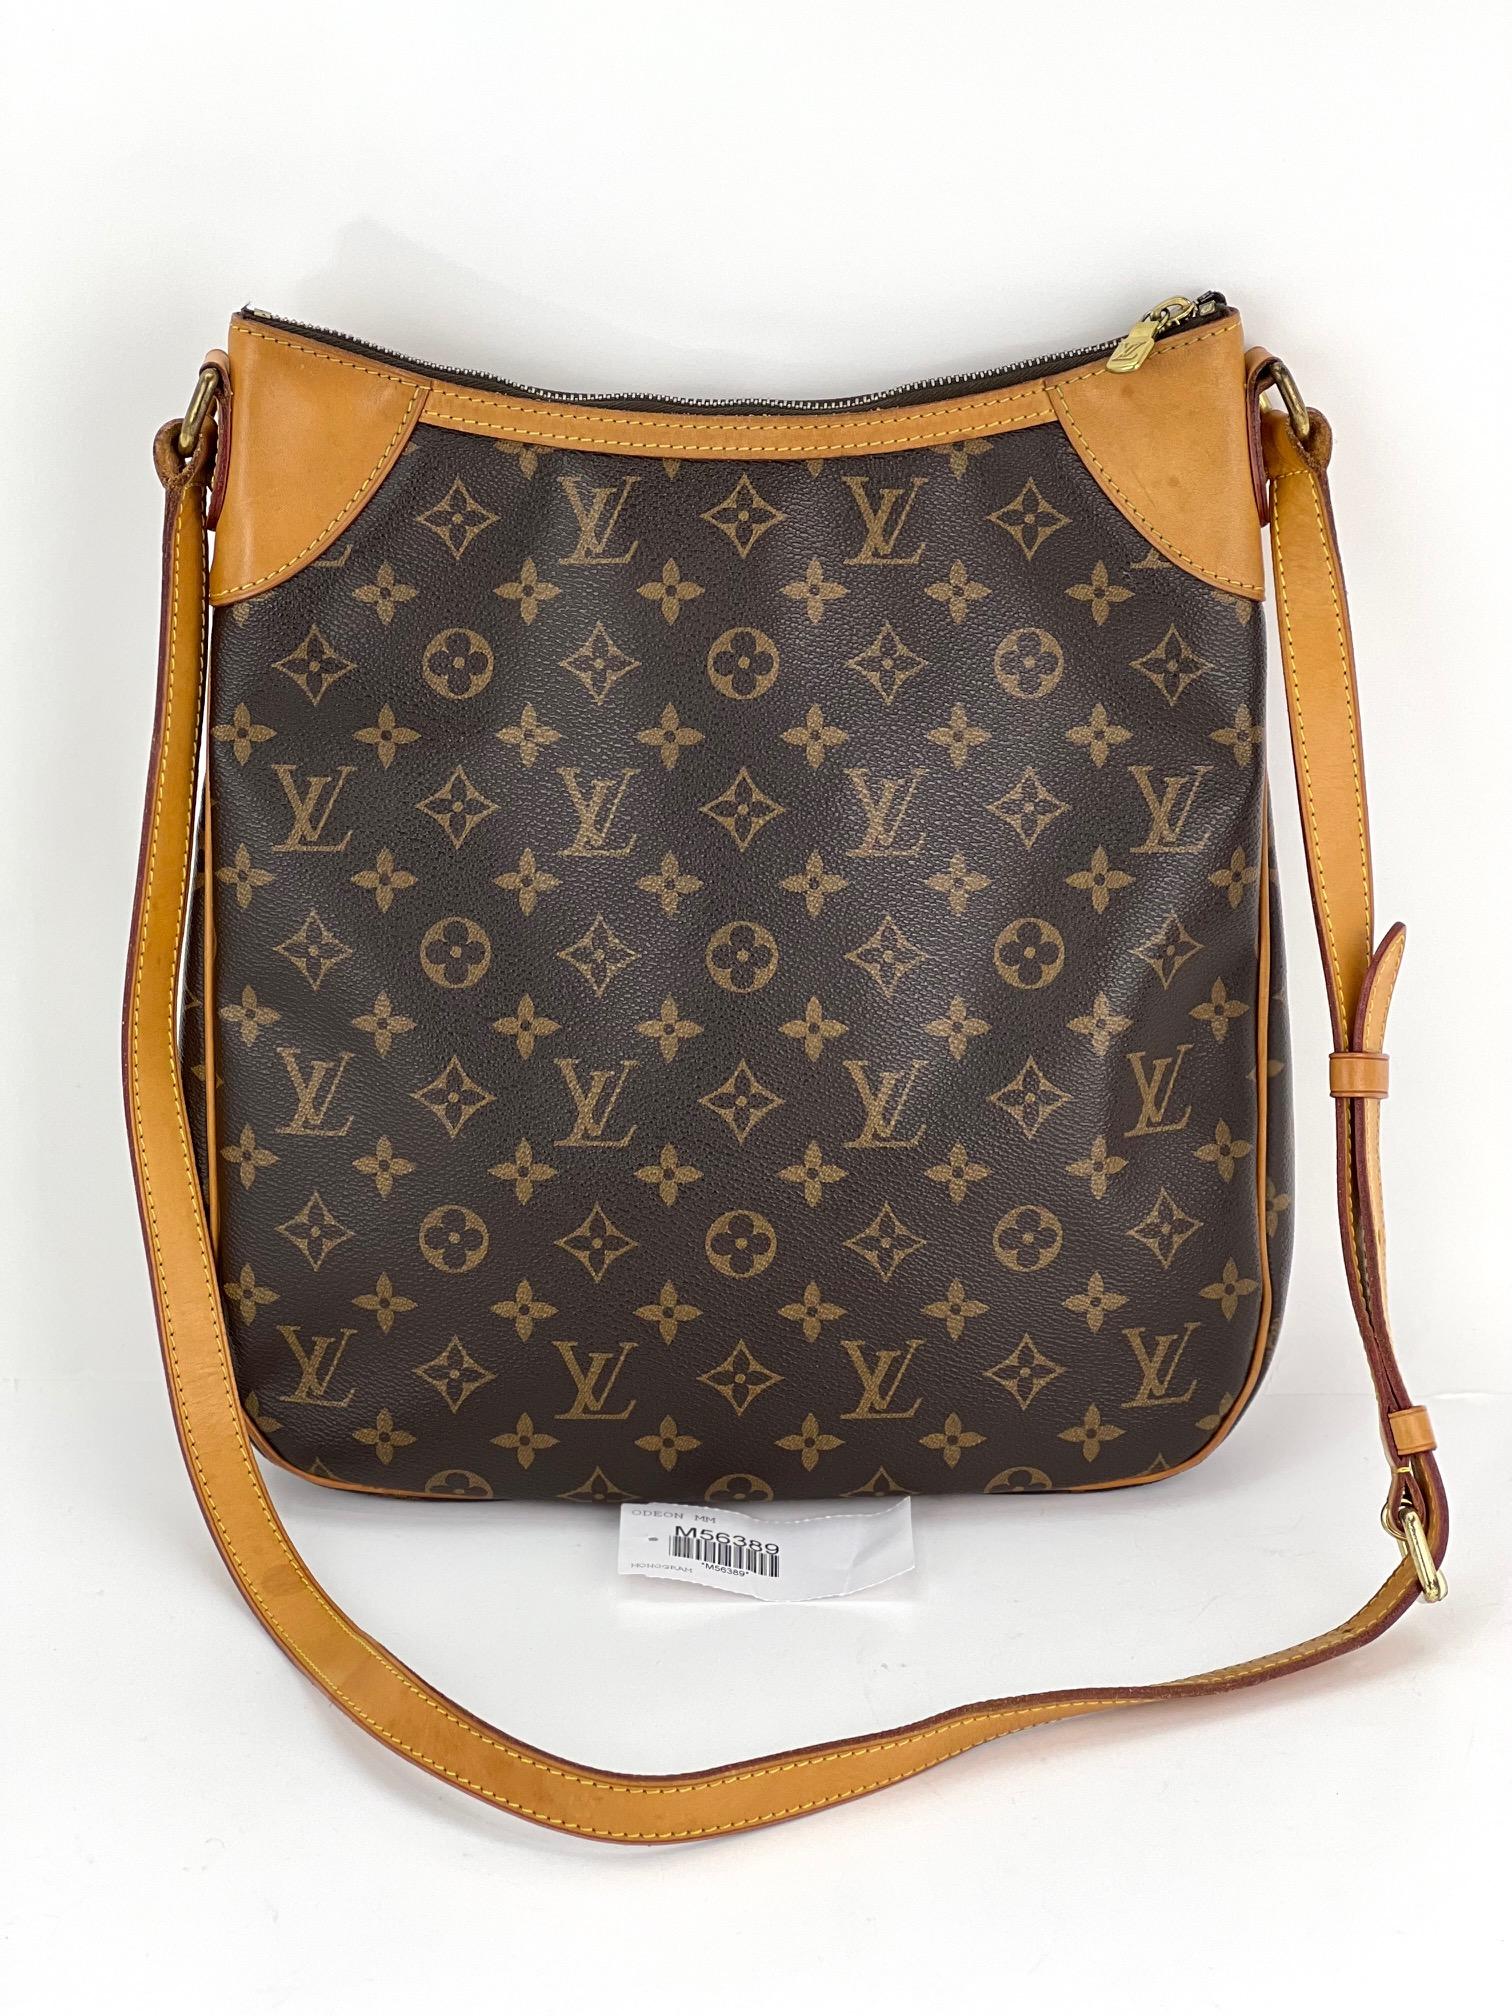 Pre-Owned  100% Authentic
LOUIS VUITTON Odeon MM Monogram M56389
RATING: B...Good, well maintained,
shows minor signs of wear
MATERIAL: monogram canvas, leather trims
LEATHER TRIM: leather on top corners and piping
have some light marks and